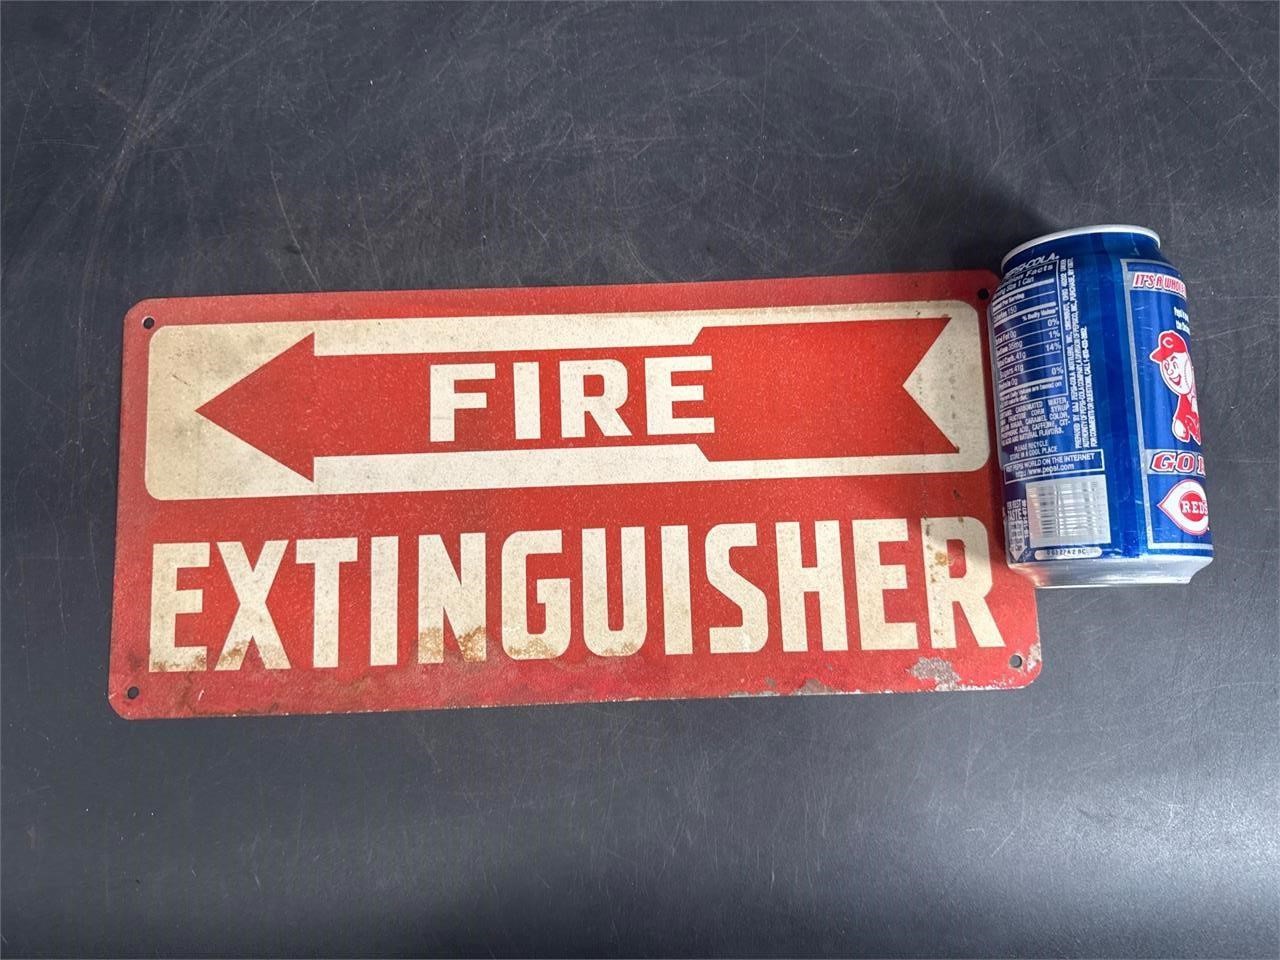 14X6" FIRE EXTINGUISHER SIGN OLD REFLECTIVE PAINT